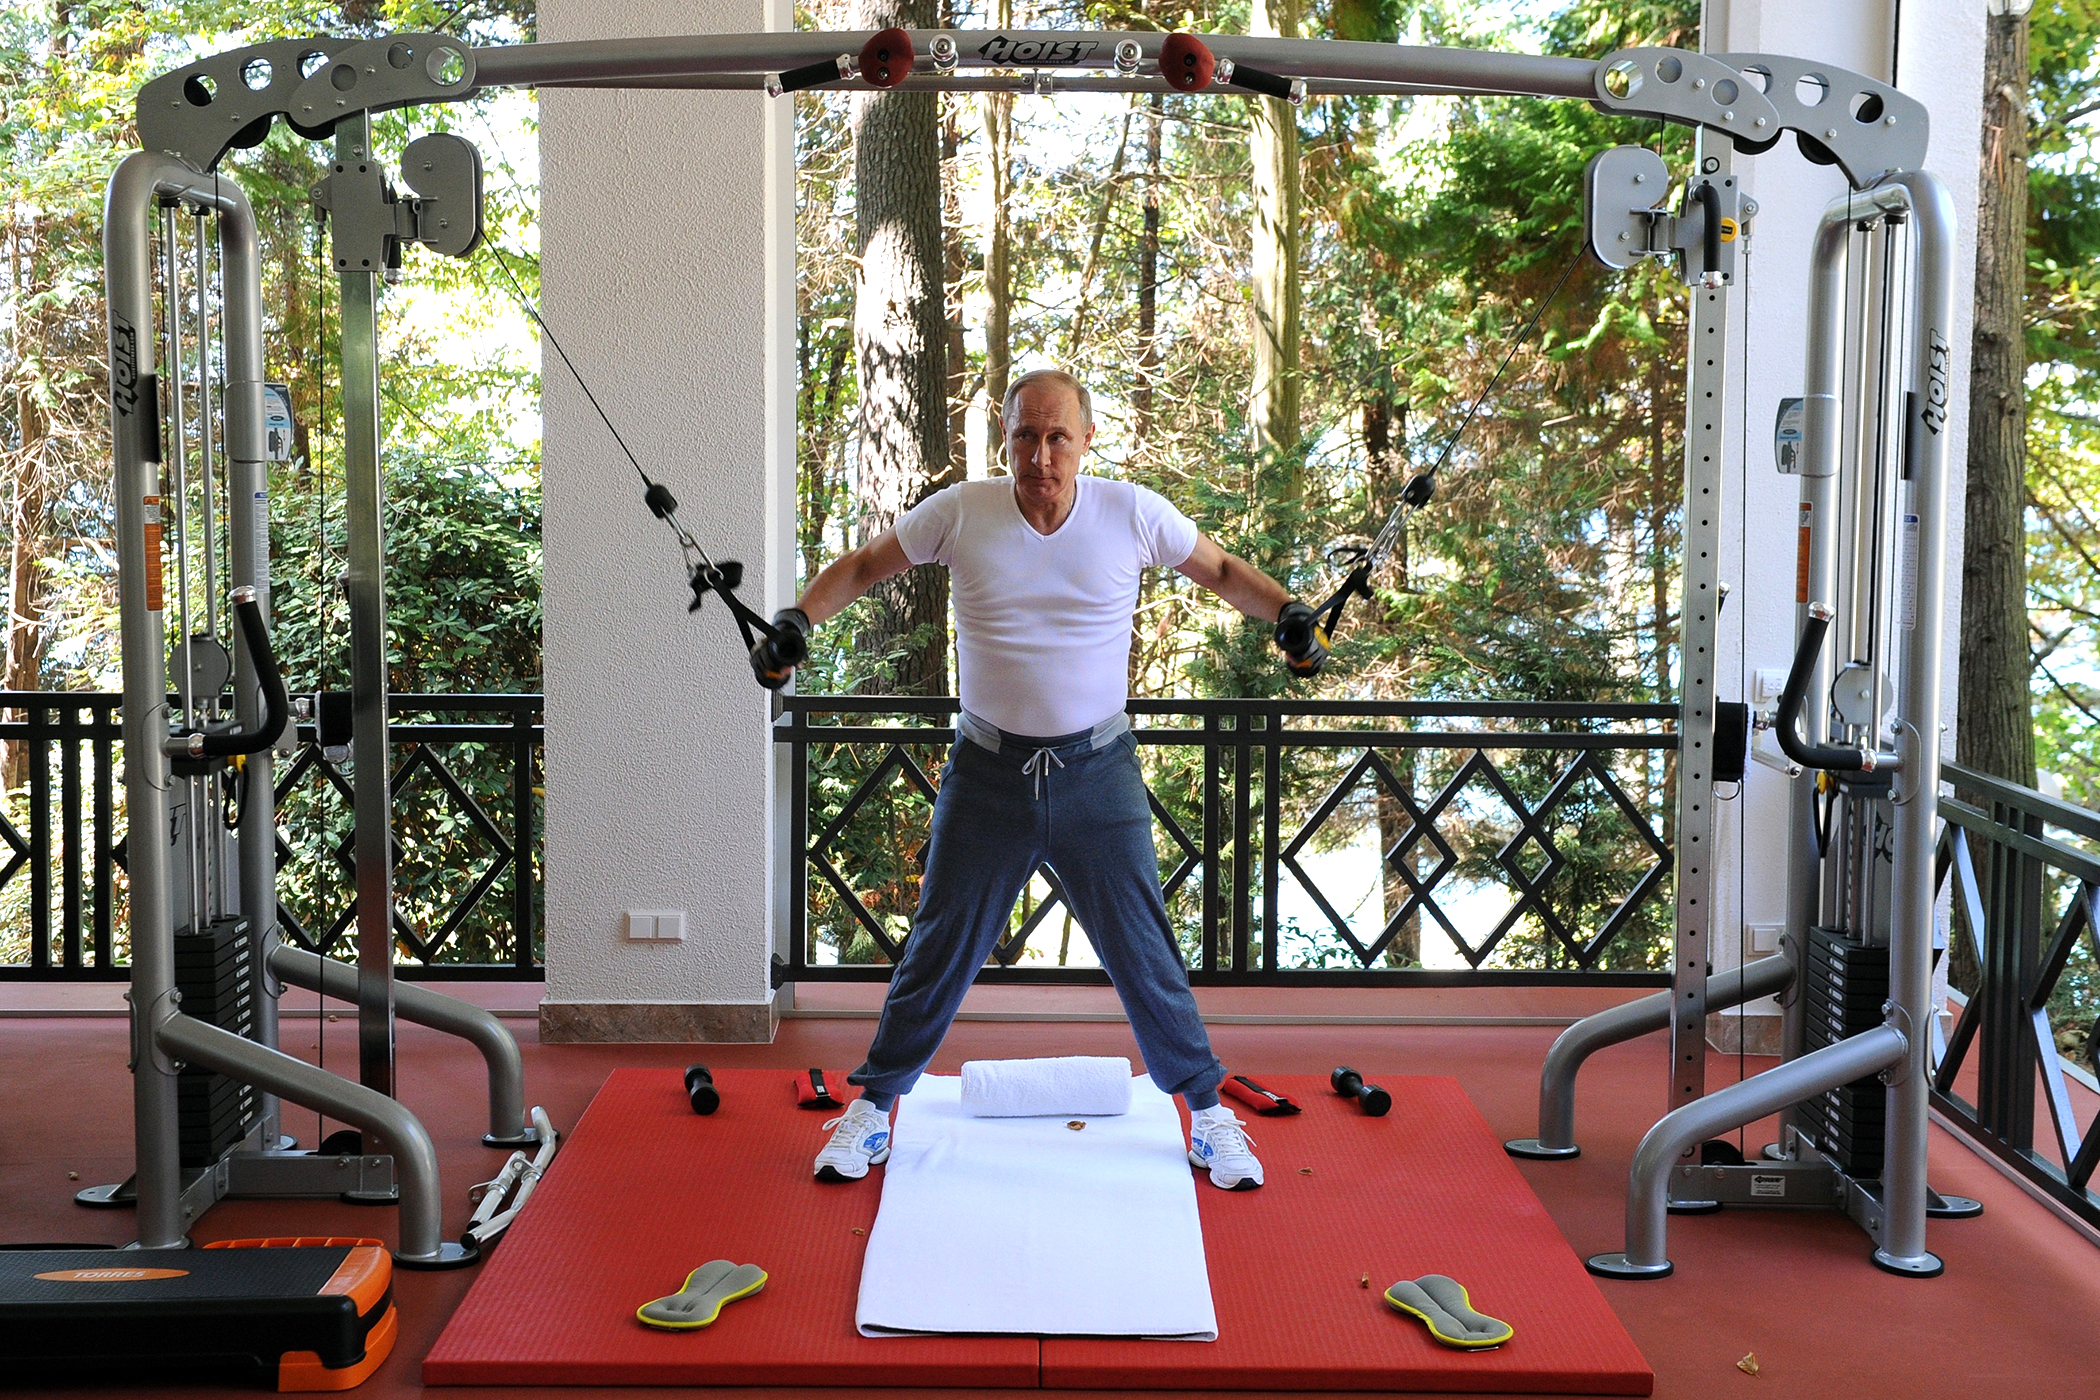 Putin working out in cashmere sweatpants